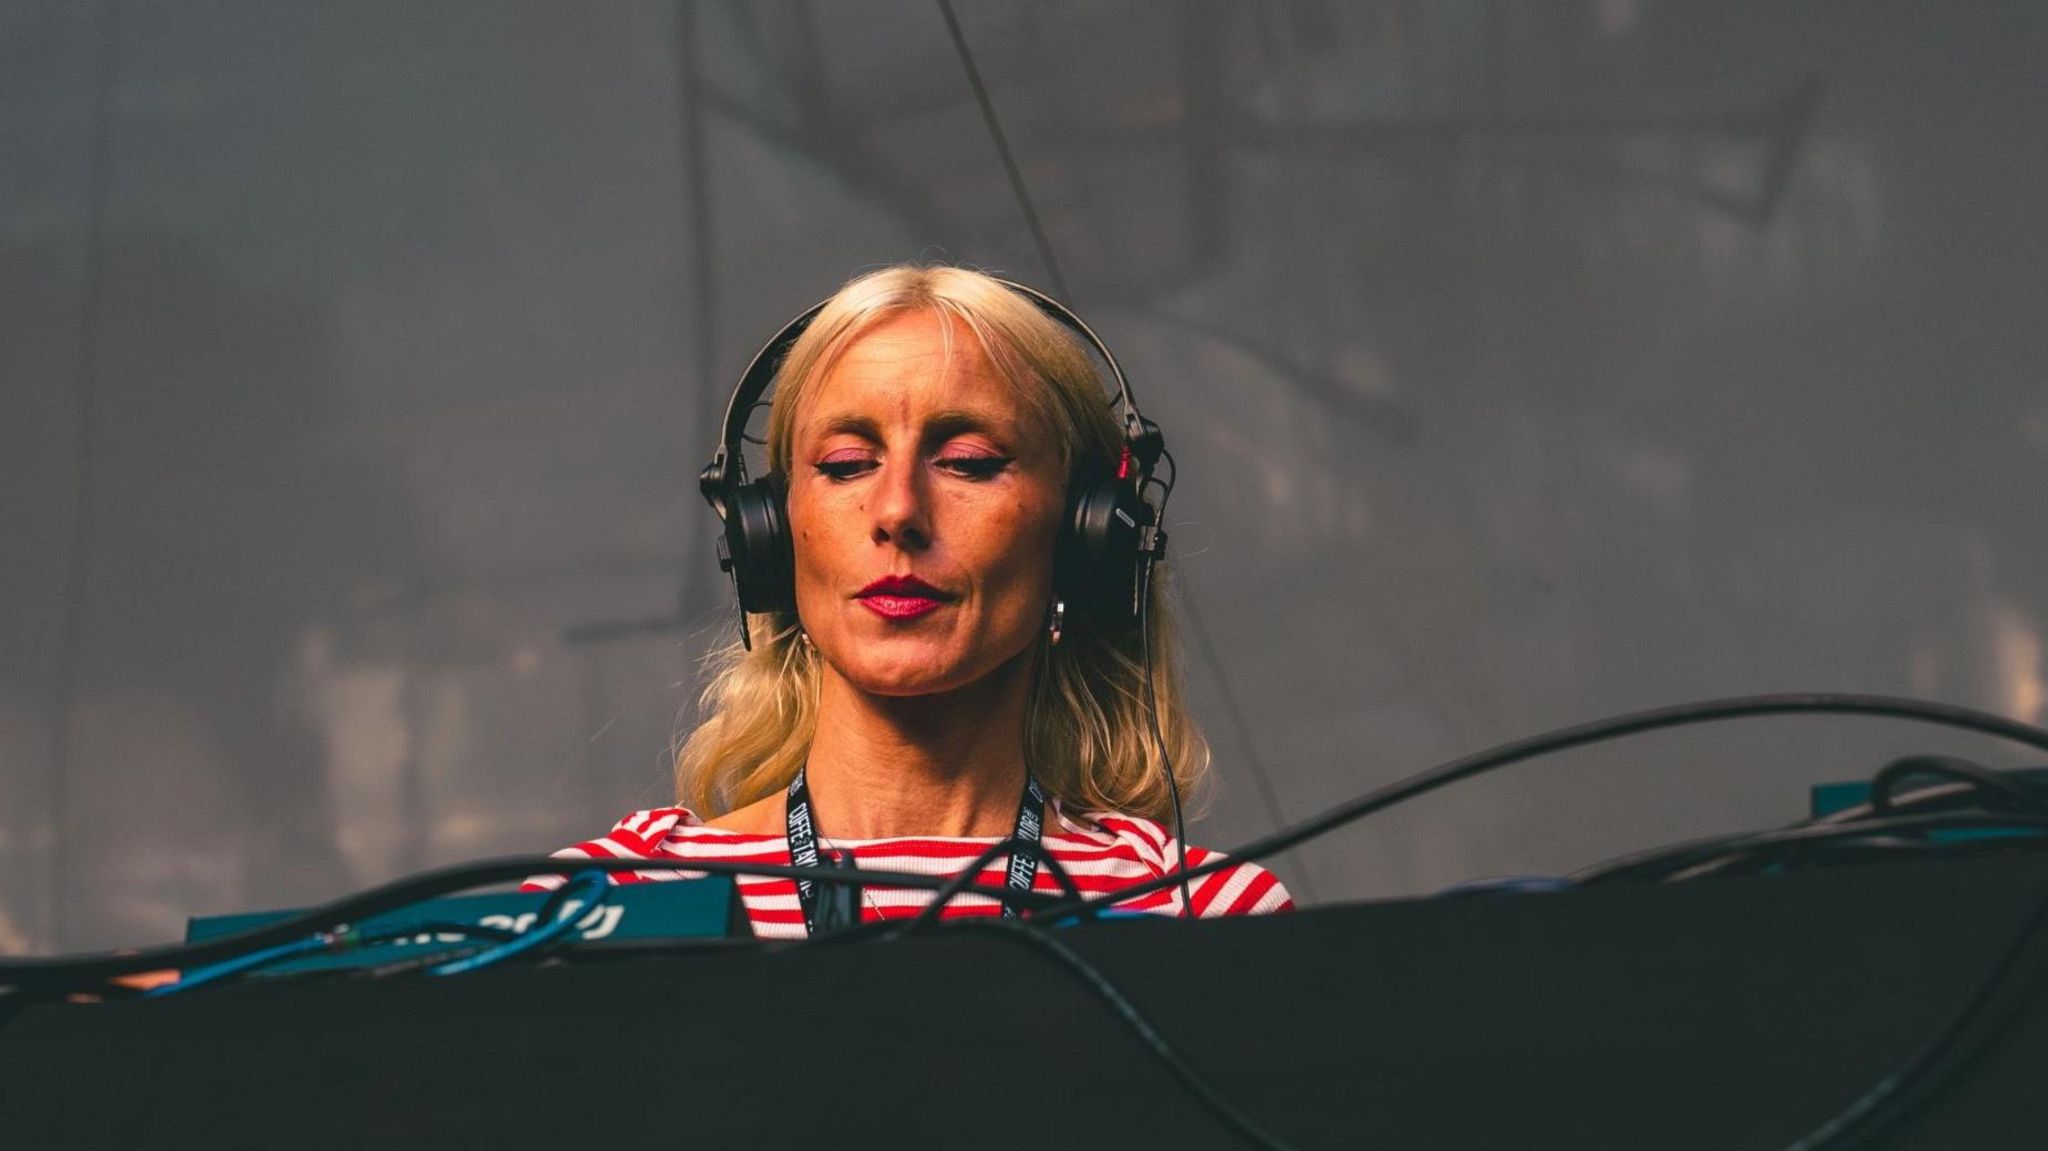 Blonde woman wearing a red and white stripe t shirt wears headphones at a DJ deck